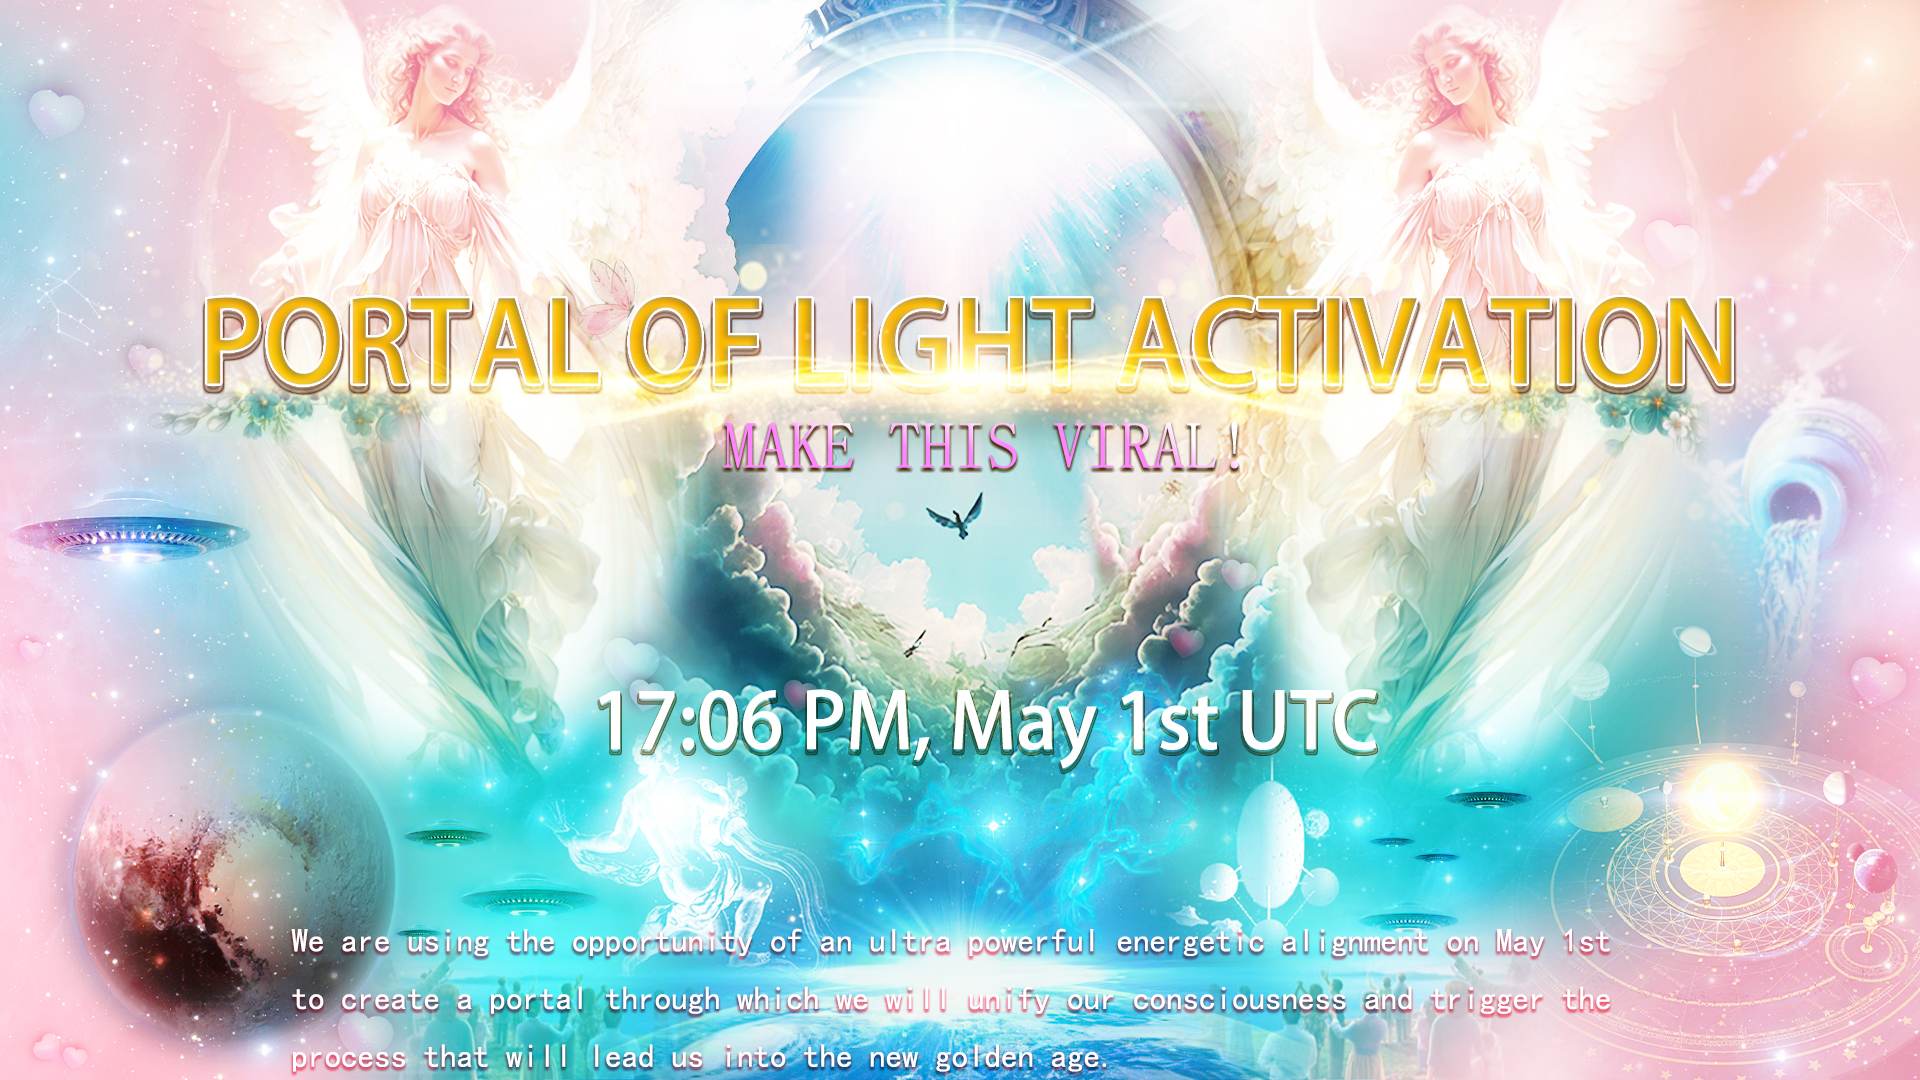 Portal of Light Activation Poster 19 - English